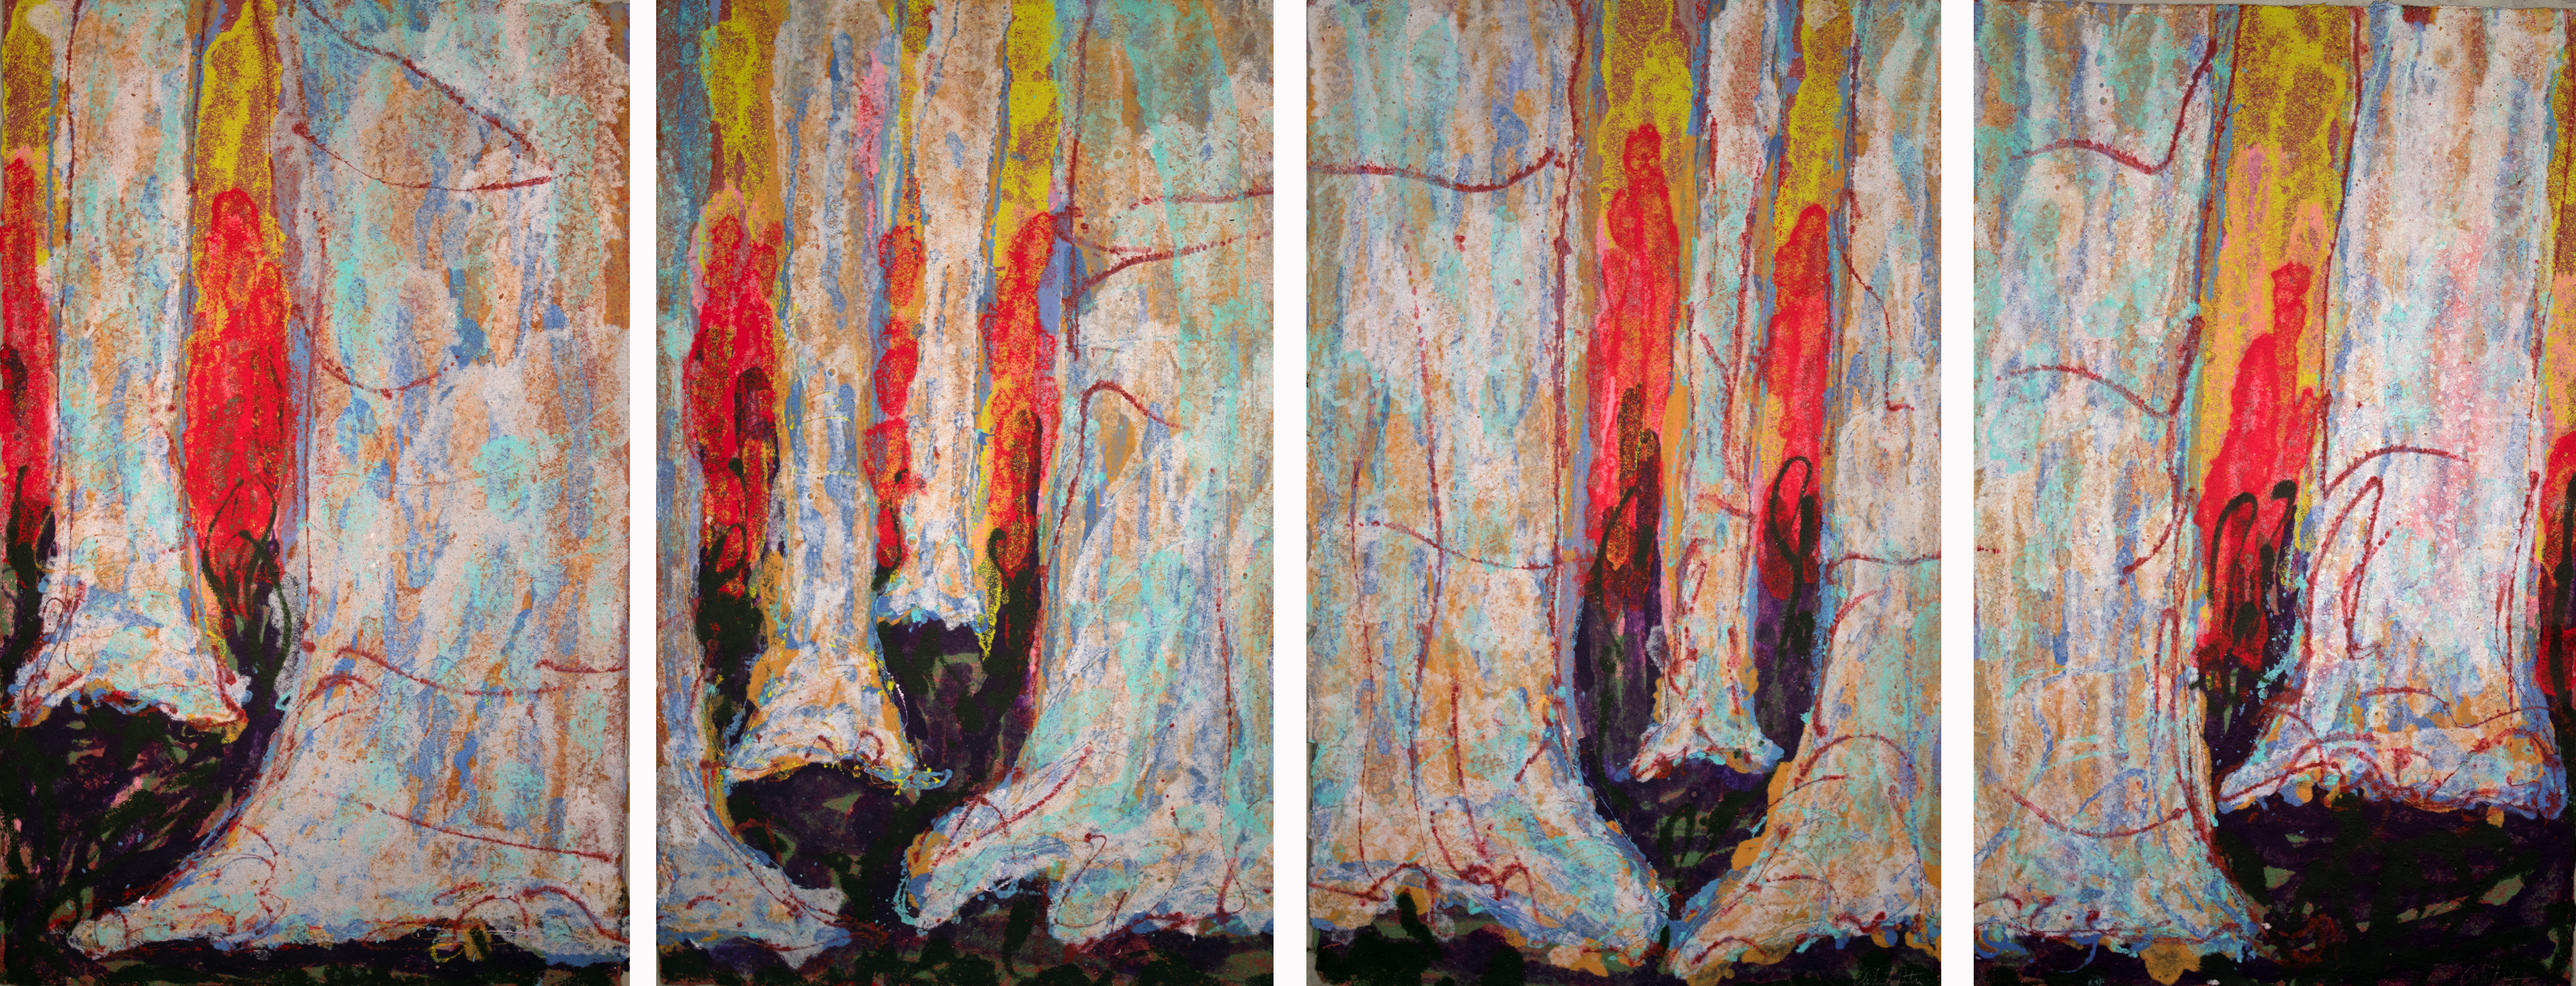 Burgundy contour lines of pulp painting meander across white and gray tree trunks as fiery reds, yellows, deep purples and blacks burn their way into the foreground from behind the forest of trees depicted in this four-panel work of art.  Sky blue, turquoise, and yellow ochre surface from behind the gray, cooling the surface appearance of the pale trees.  Vigorous mark-making with paper-pulp defines the tree trunks and the fiery background which sit in contrast with each other in this piece.